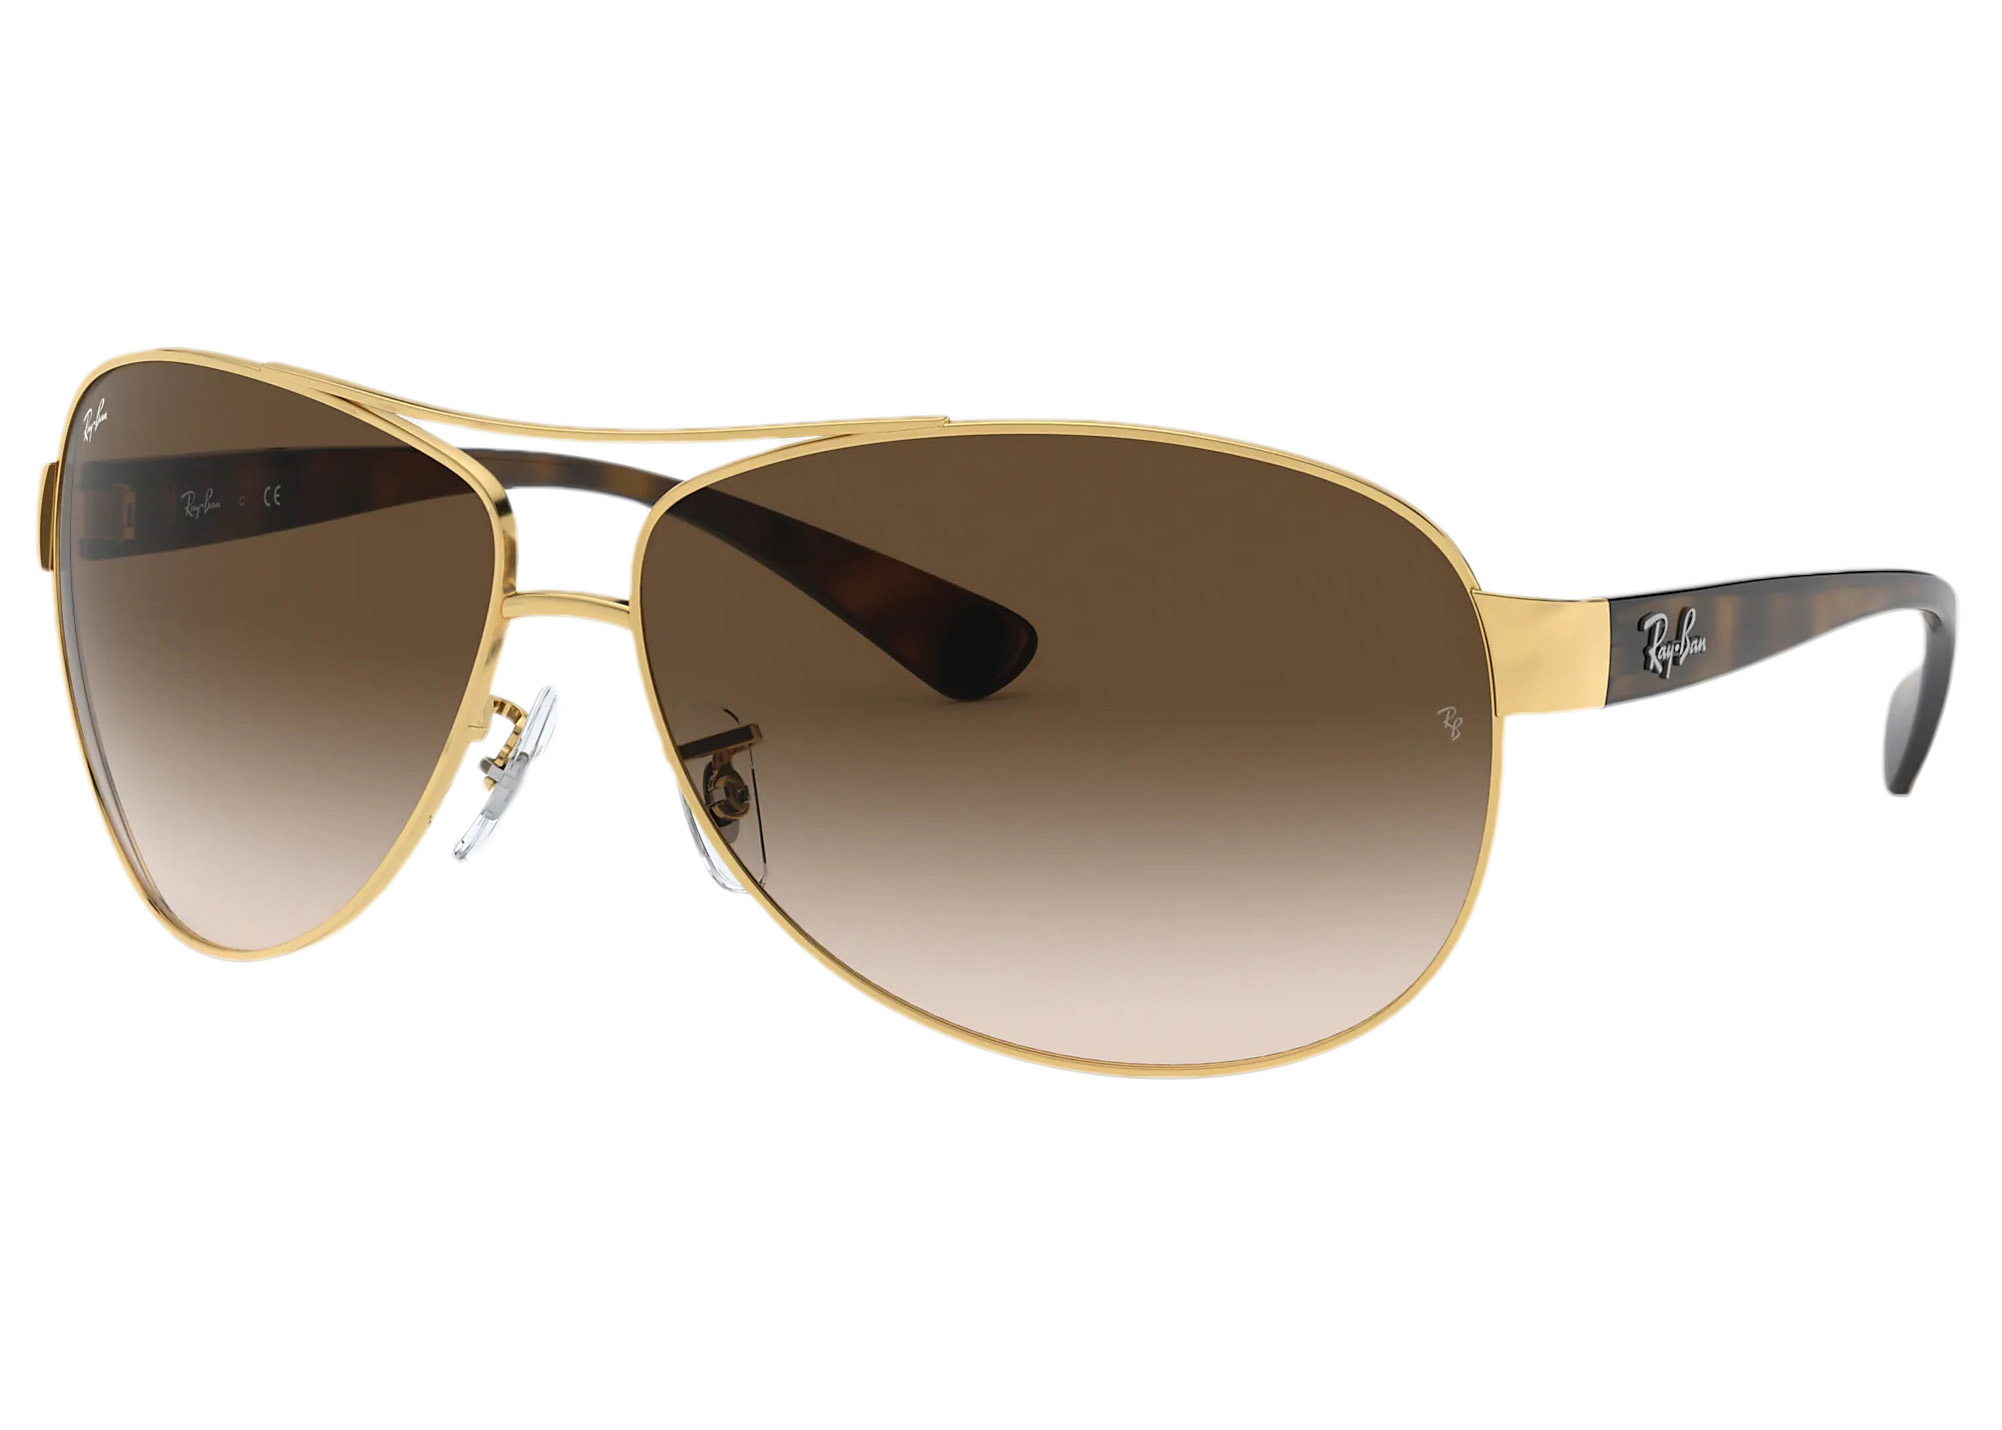 Ray-Ban RB3386 Sunglasses Polished Gold/Brown (RB3386) Men's - US